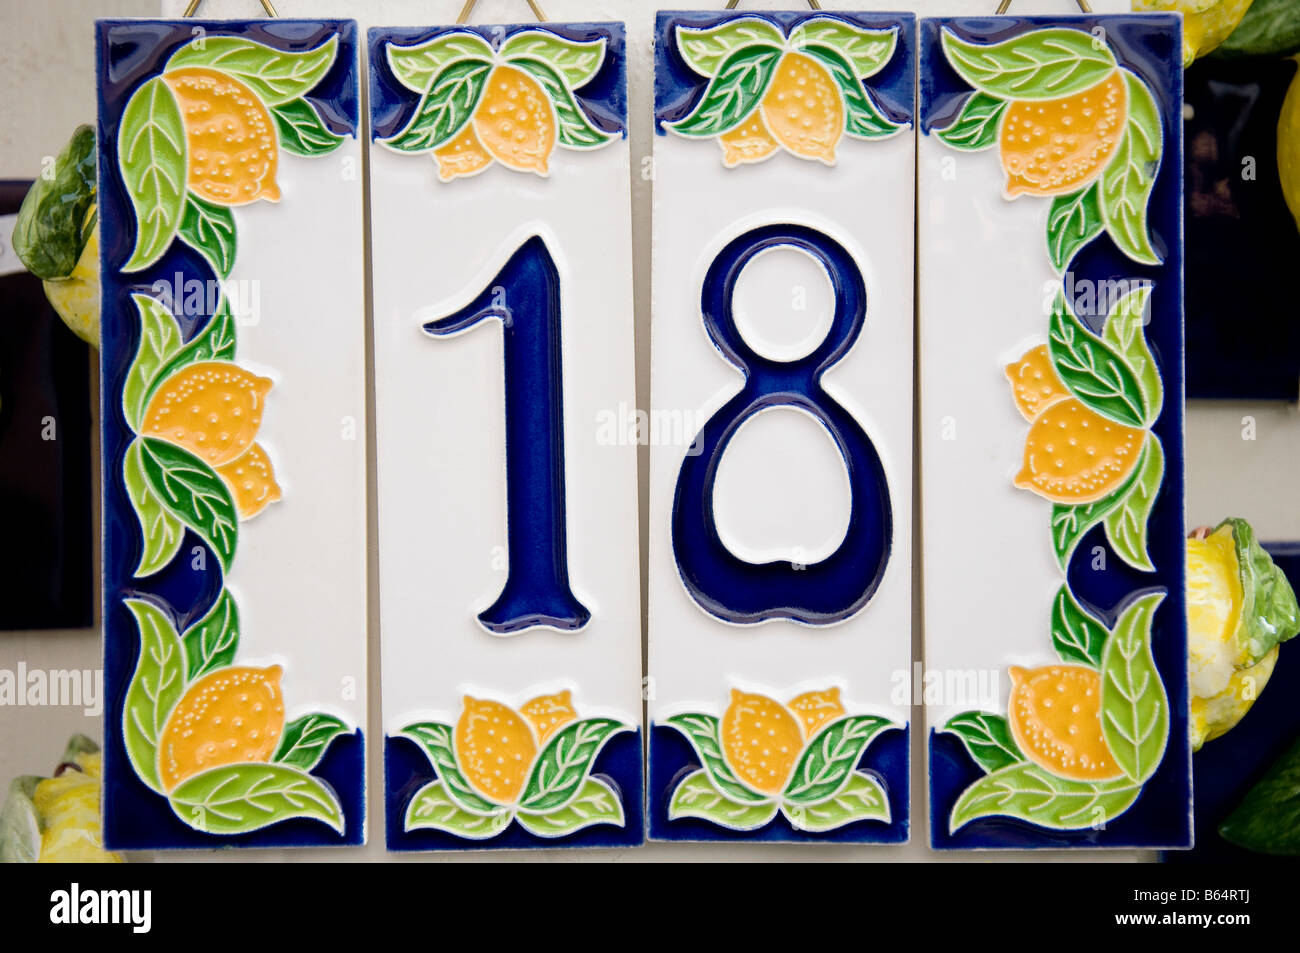 House number 18 and lemons on a ceramic tile for sale with price labels removed Limone sul Garda Lake Garda Italy Stock Photo